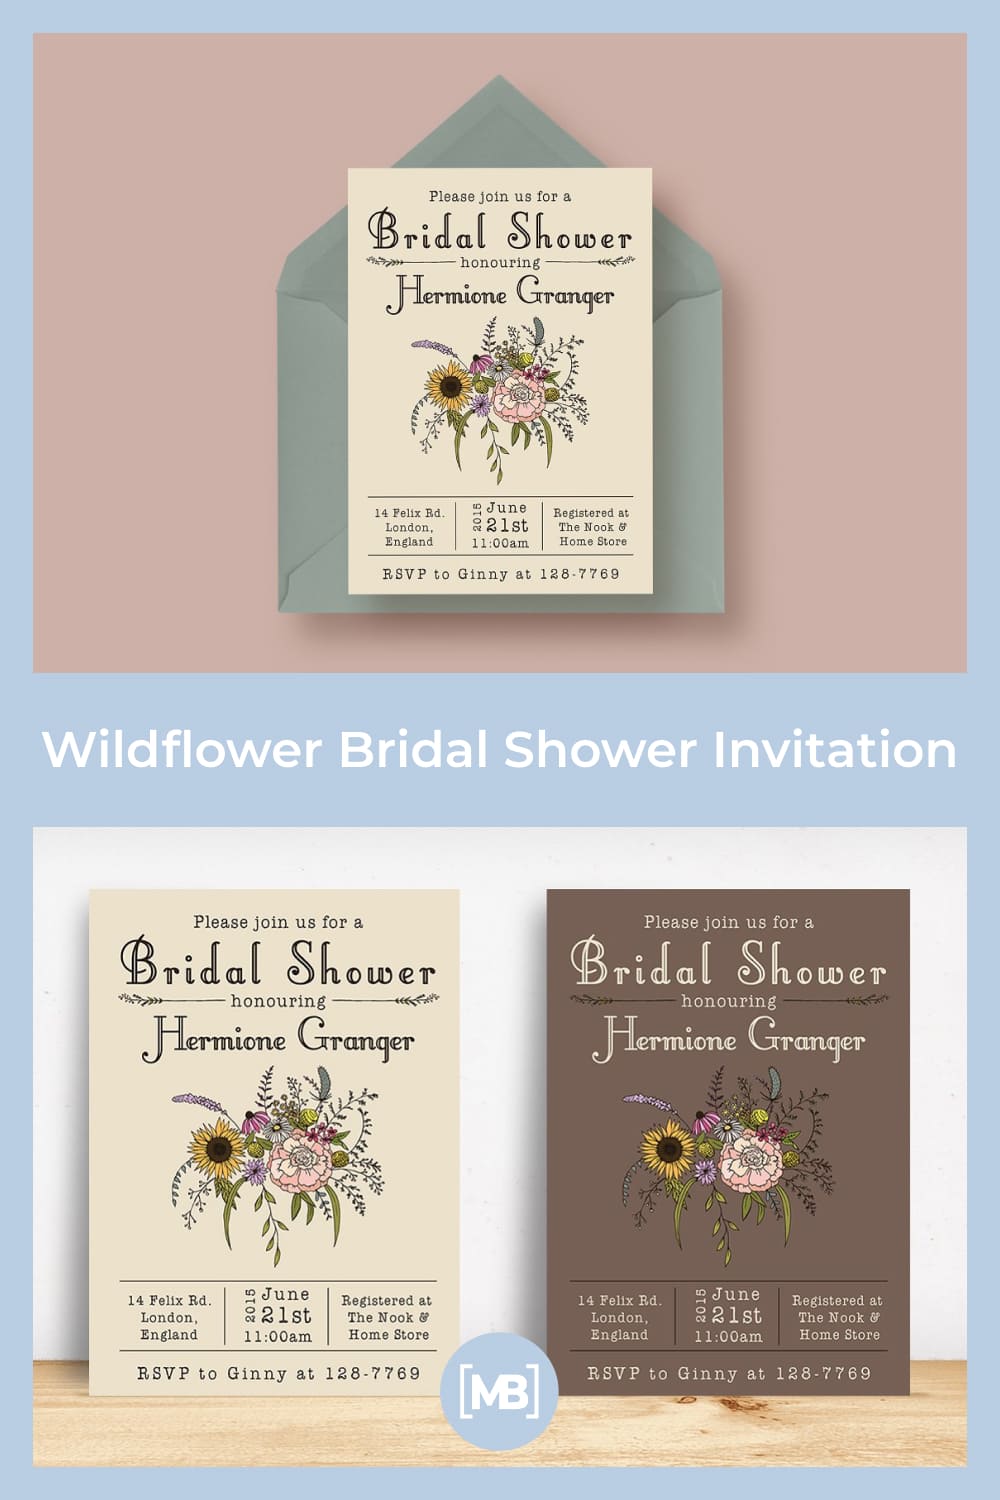 Wildflower Bridal Shower Invitation includes the PSD file for both the cream and walnut invitations. All text and colors are editable.